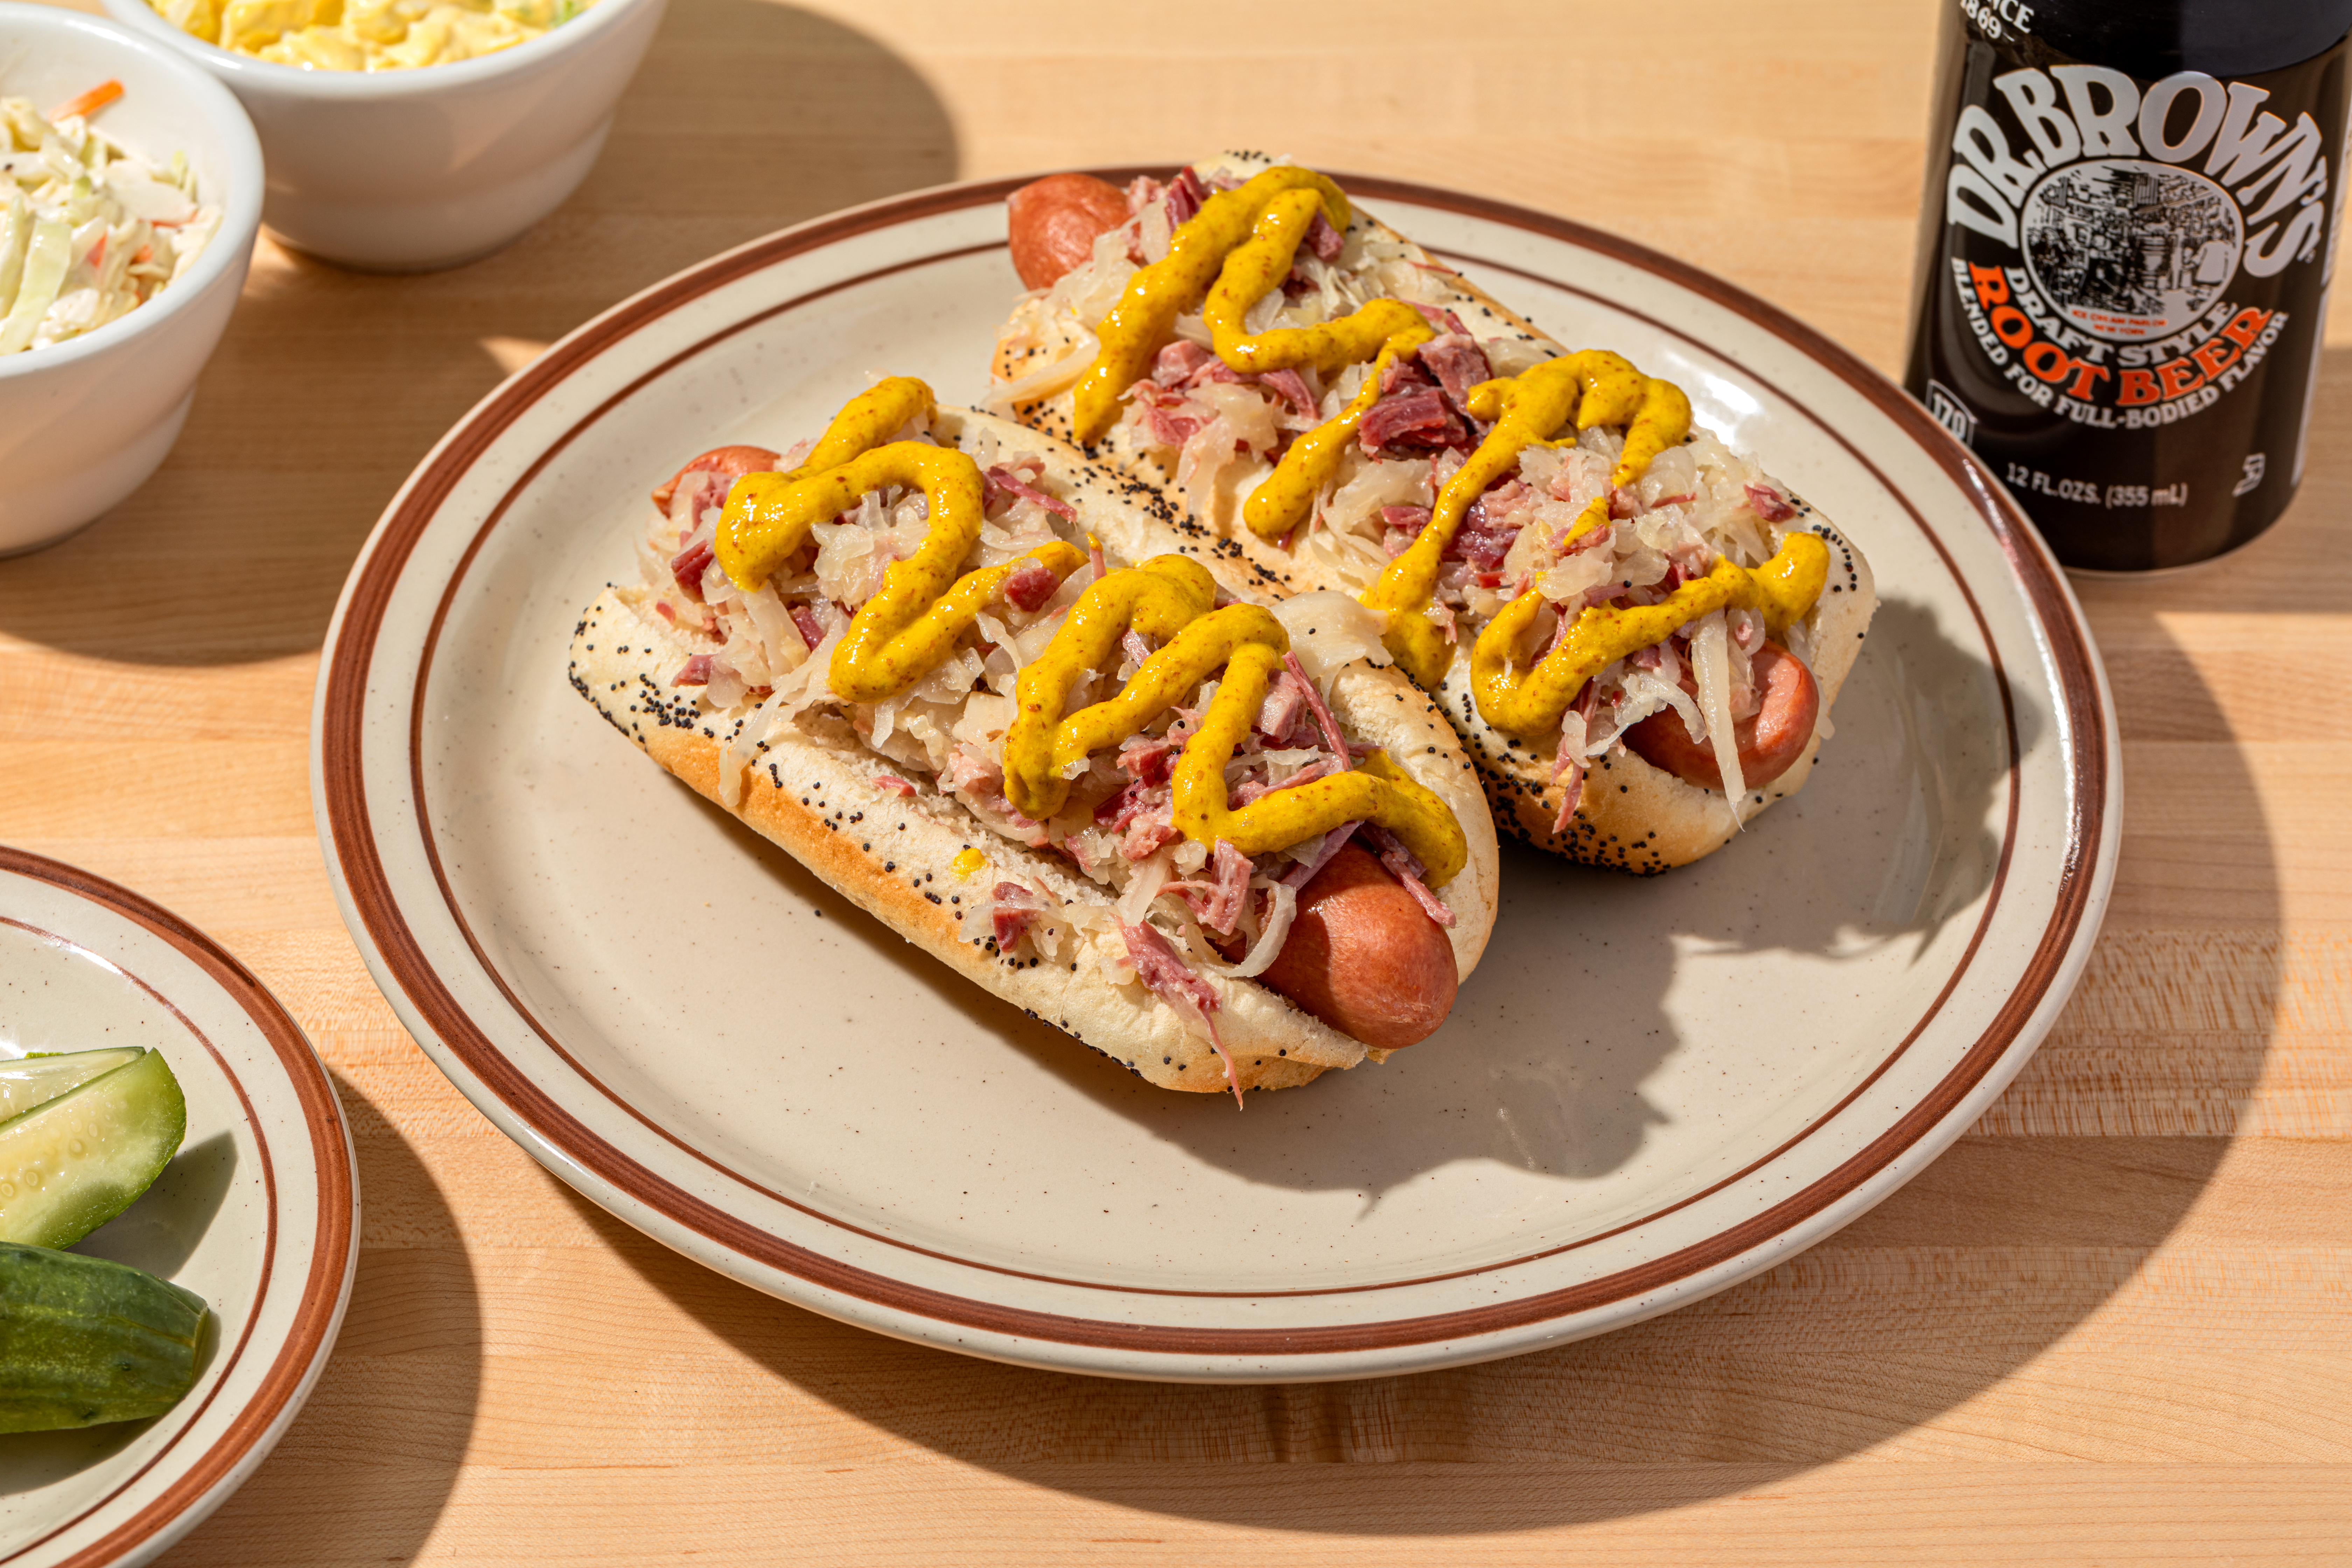 A plate holds two hot dogs smothered in corned beef hash and drizzled with brown mustard.